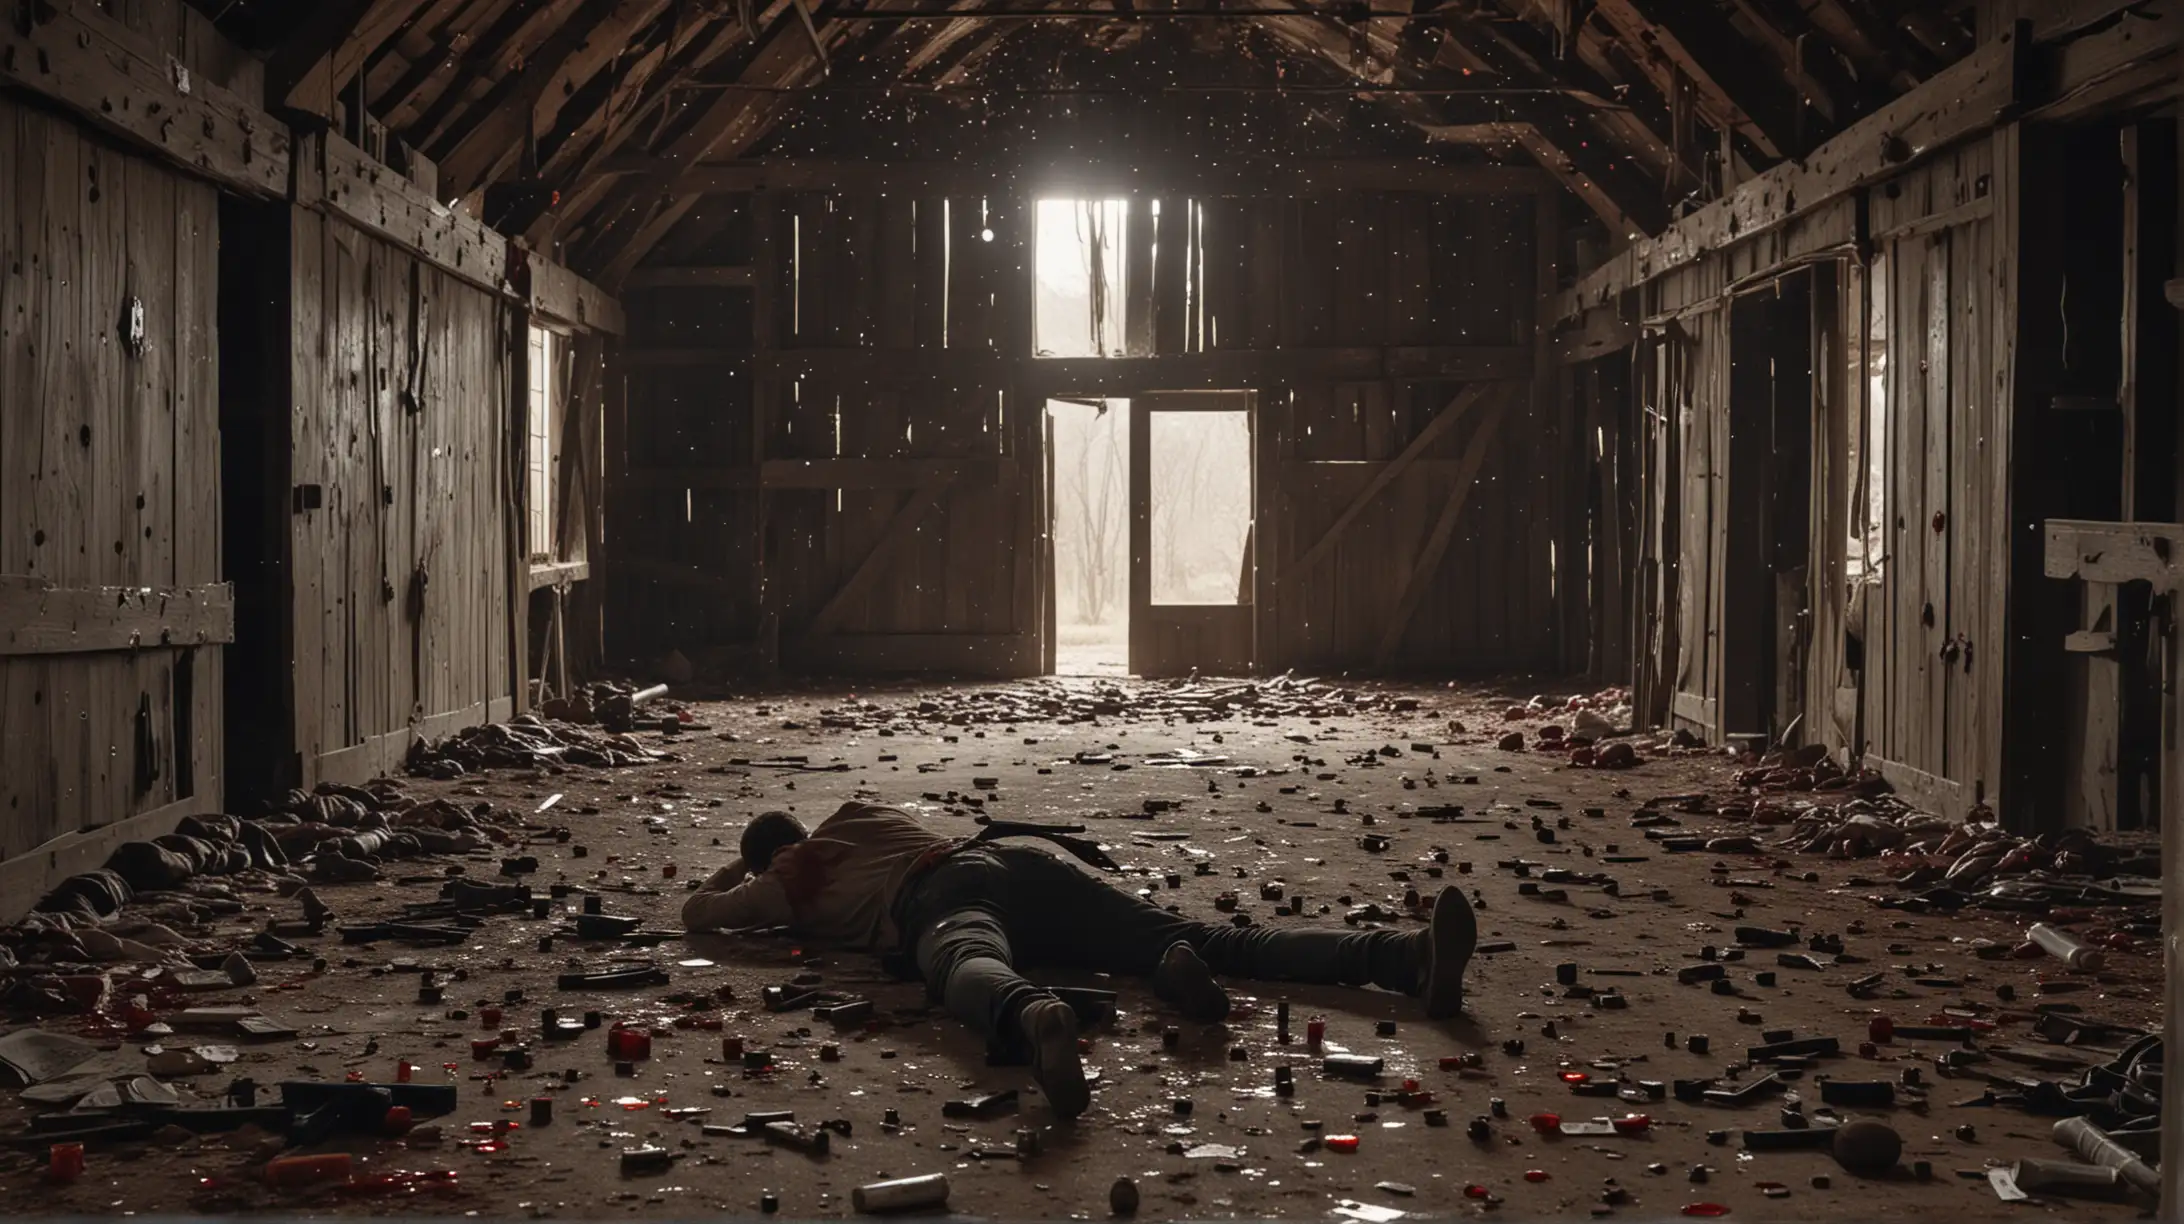 Generate a cinematic image of a the aftermath of a gun battle in an old small barn with blood, bullet holes, scattered money and a couple of dead men.